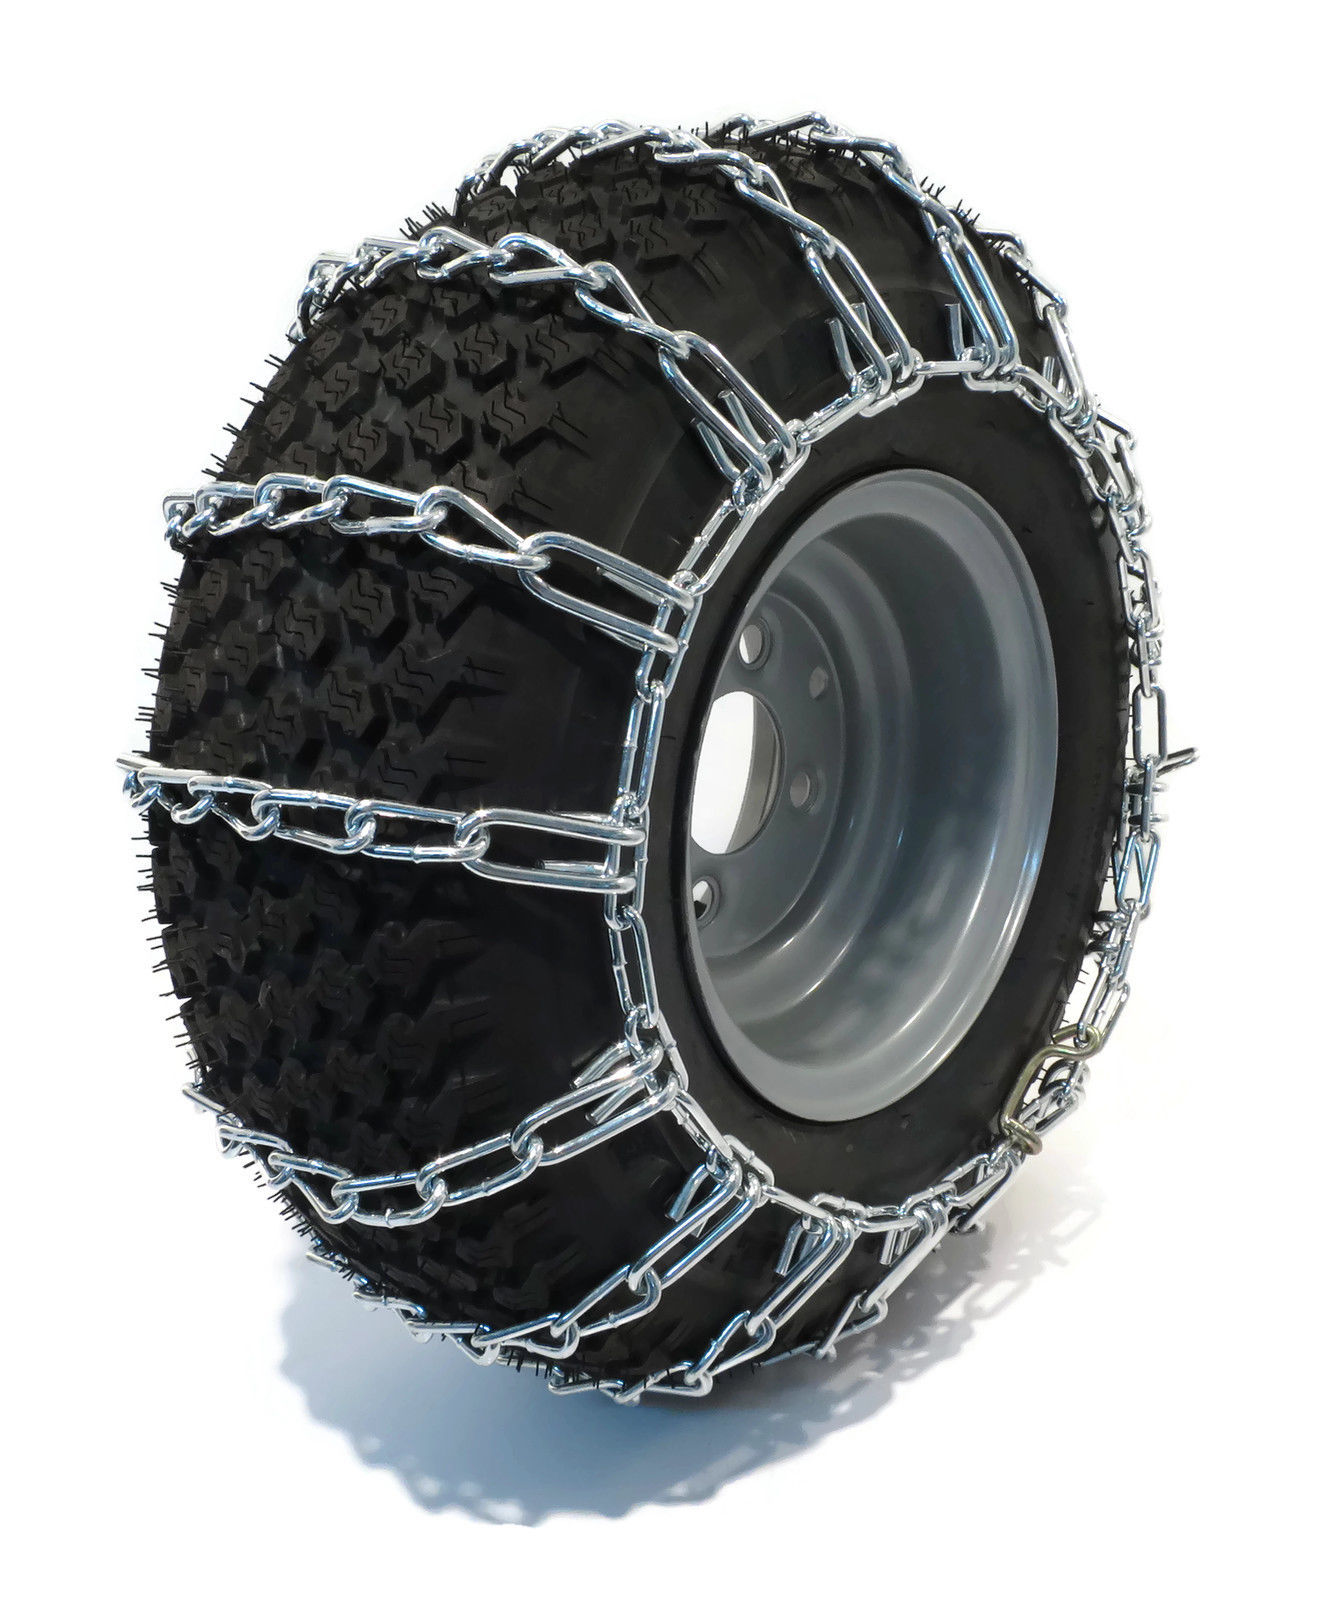 The ROP Shop | Pair 2 Link Tire Chains 18x8.5x8 For Simplicty Lawn Mower Garden Tractor Rider. TRS Part Number: 100149 - image 4 of 5